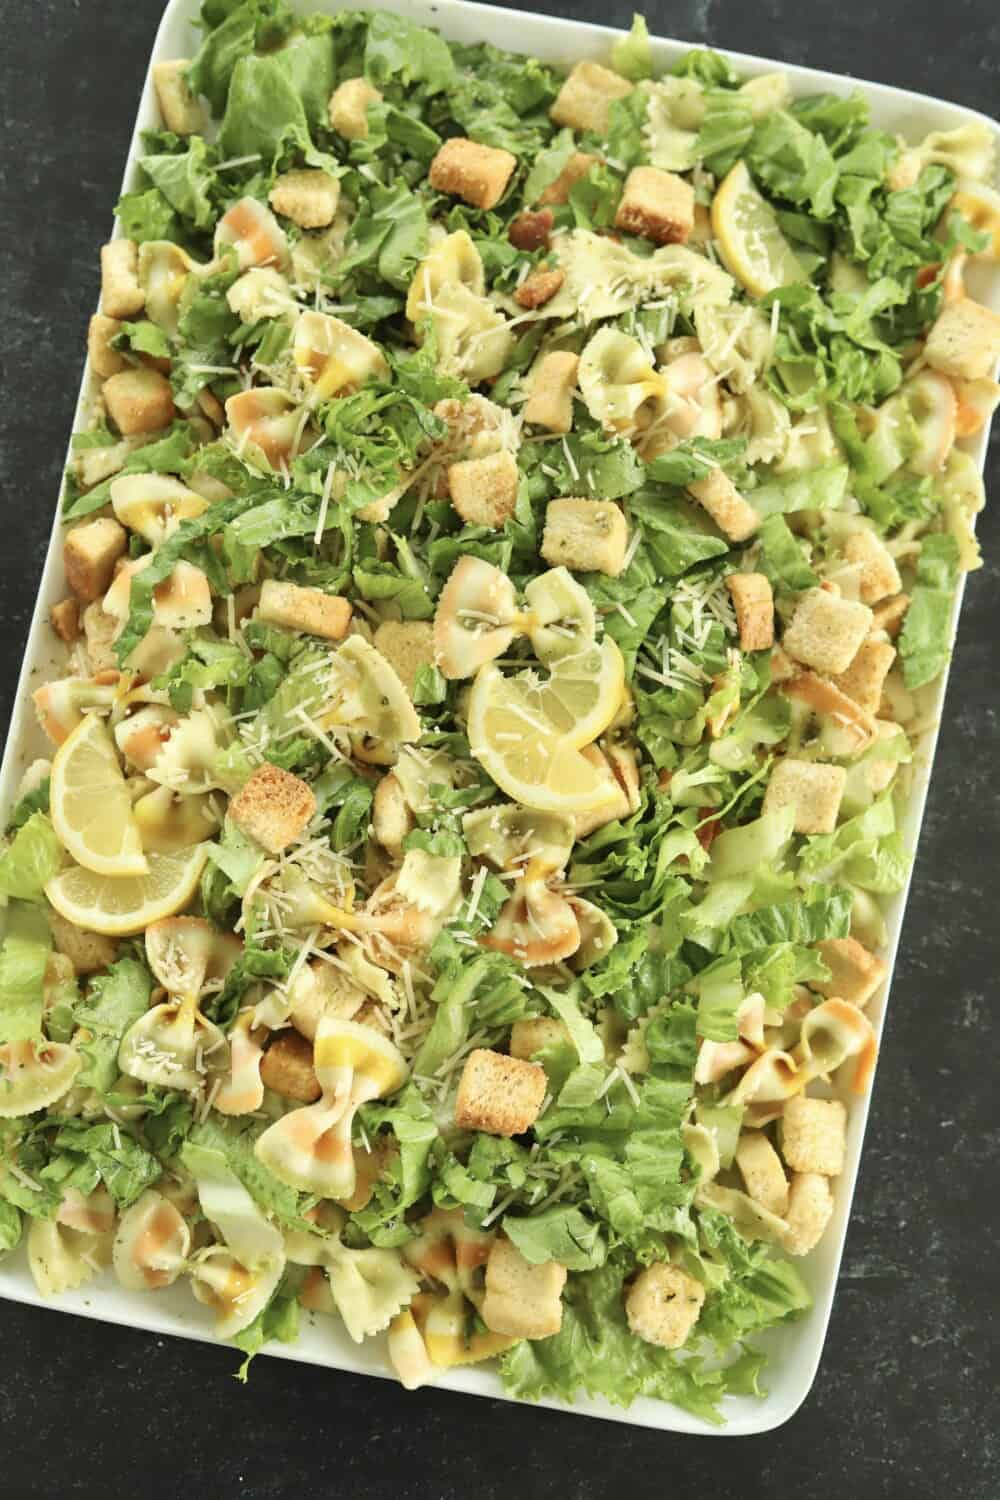 overhead image of a white serving platter full of pesto pasta salad made with lettuce, noodles, croutons, and Parmesan